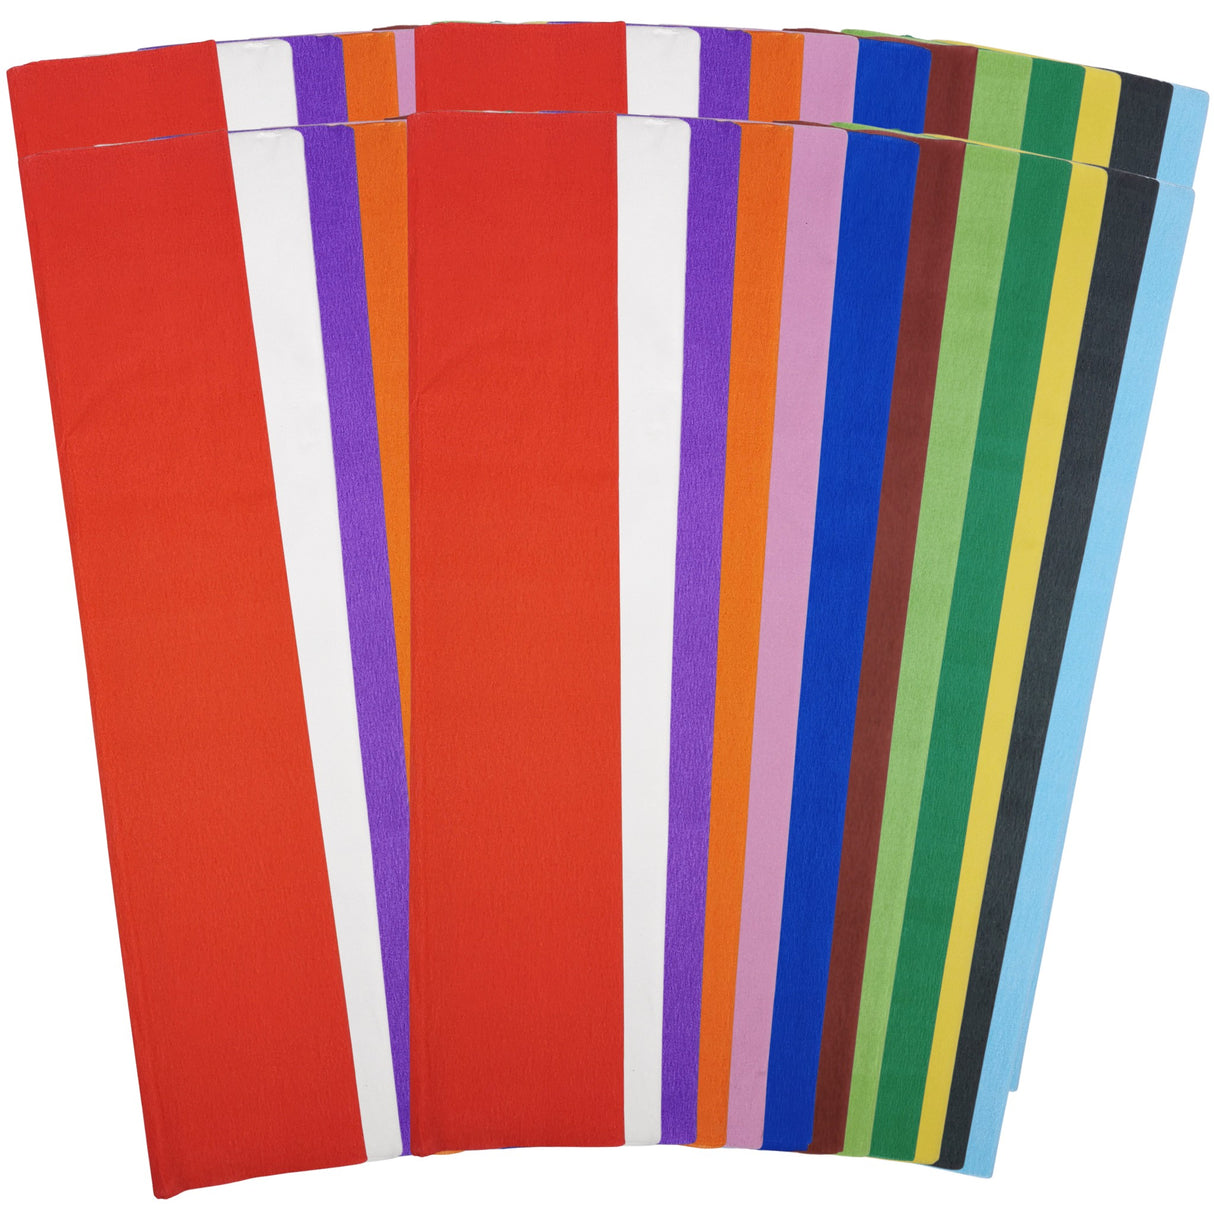 48 Extra Large Assorted Colour Crepe Paper Sheets For Flower Crafting & Gift Wrapping 50cm x 300cm